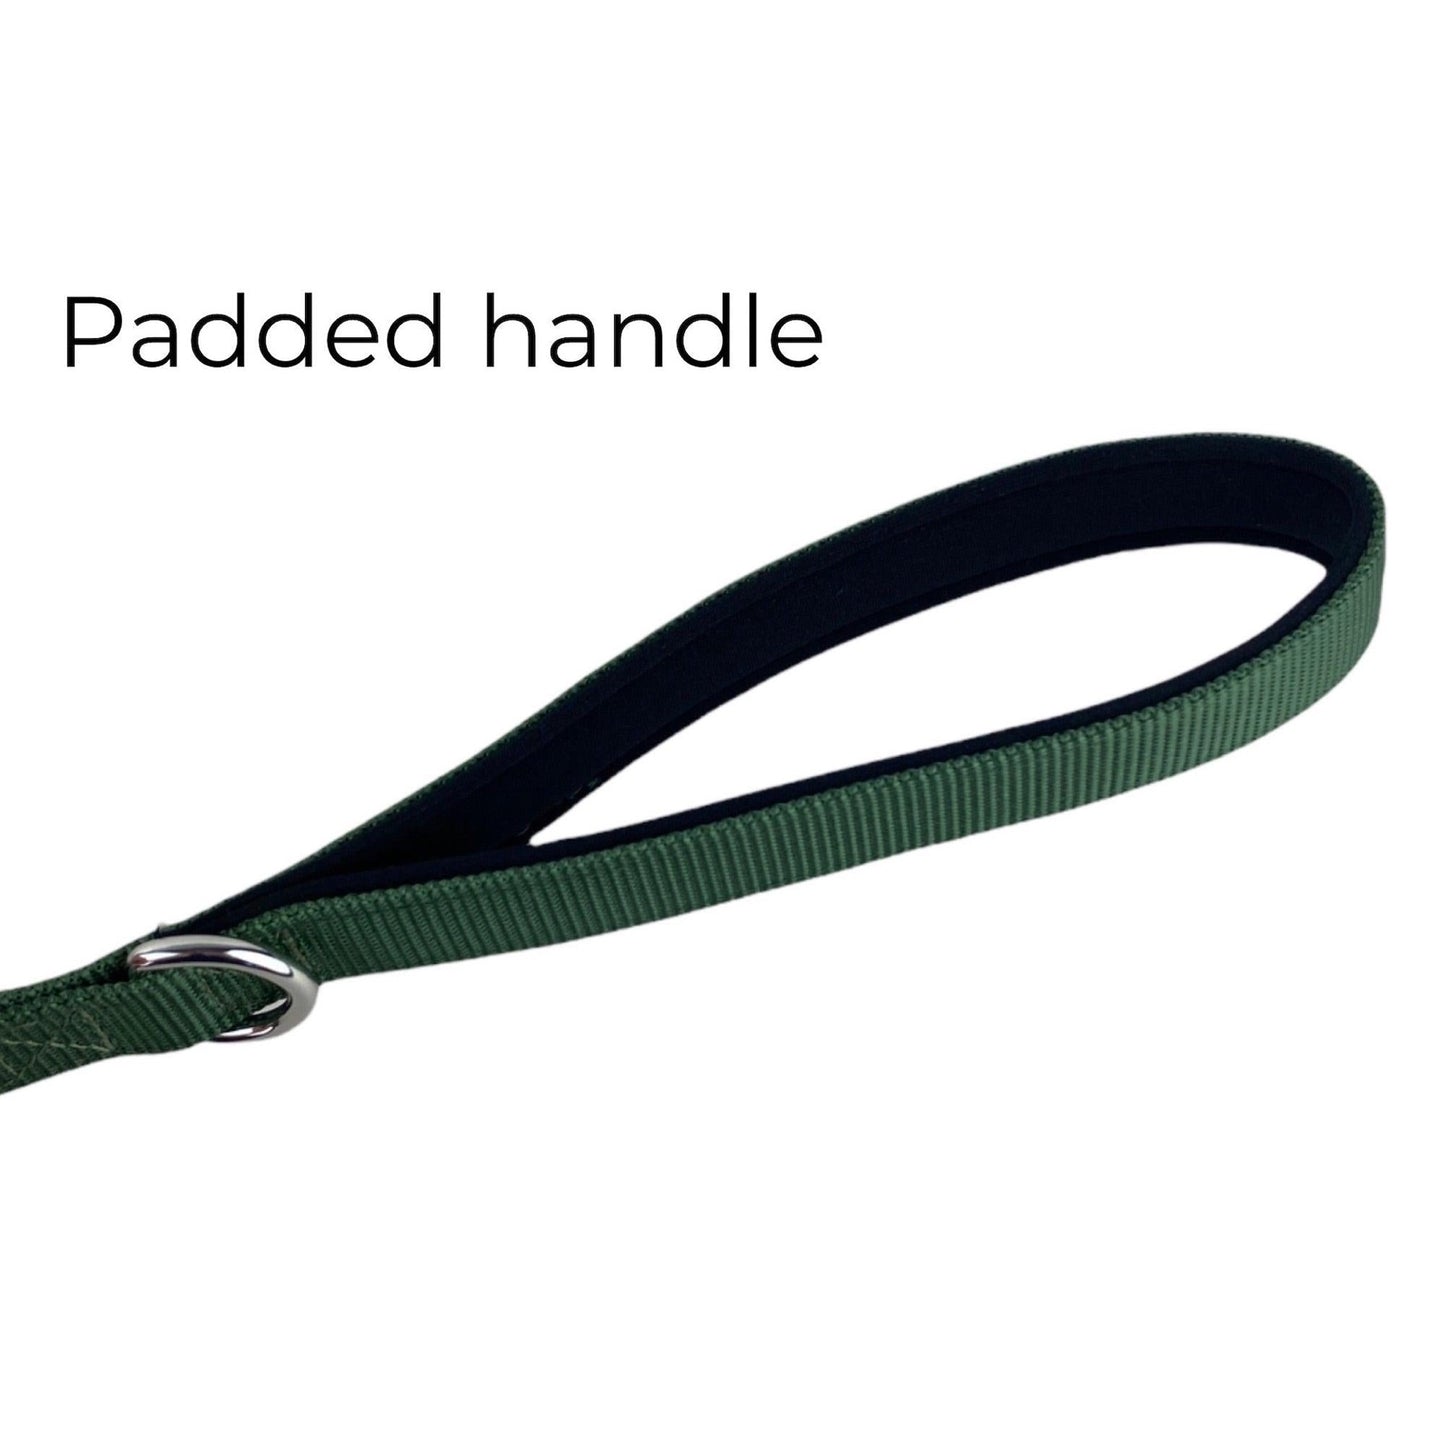 close up photo of a padded handle of an adjustable green dog leash from fearless pet